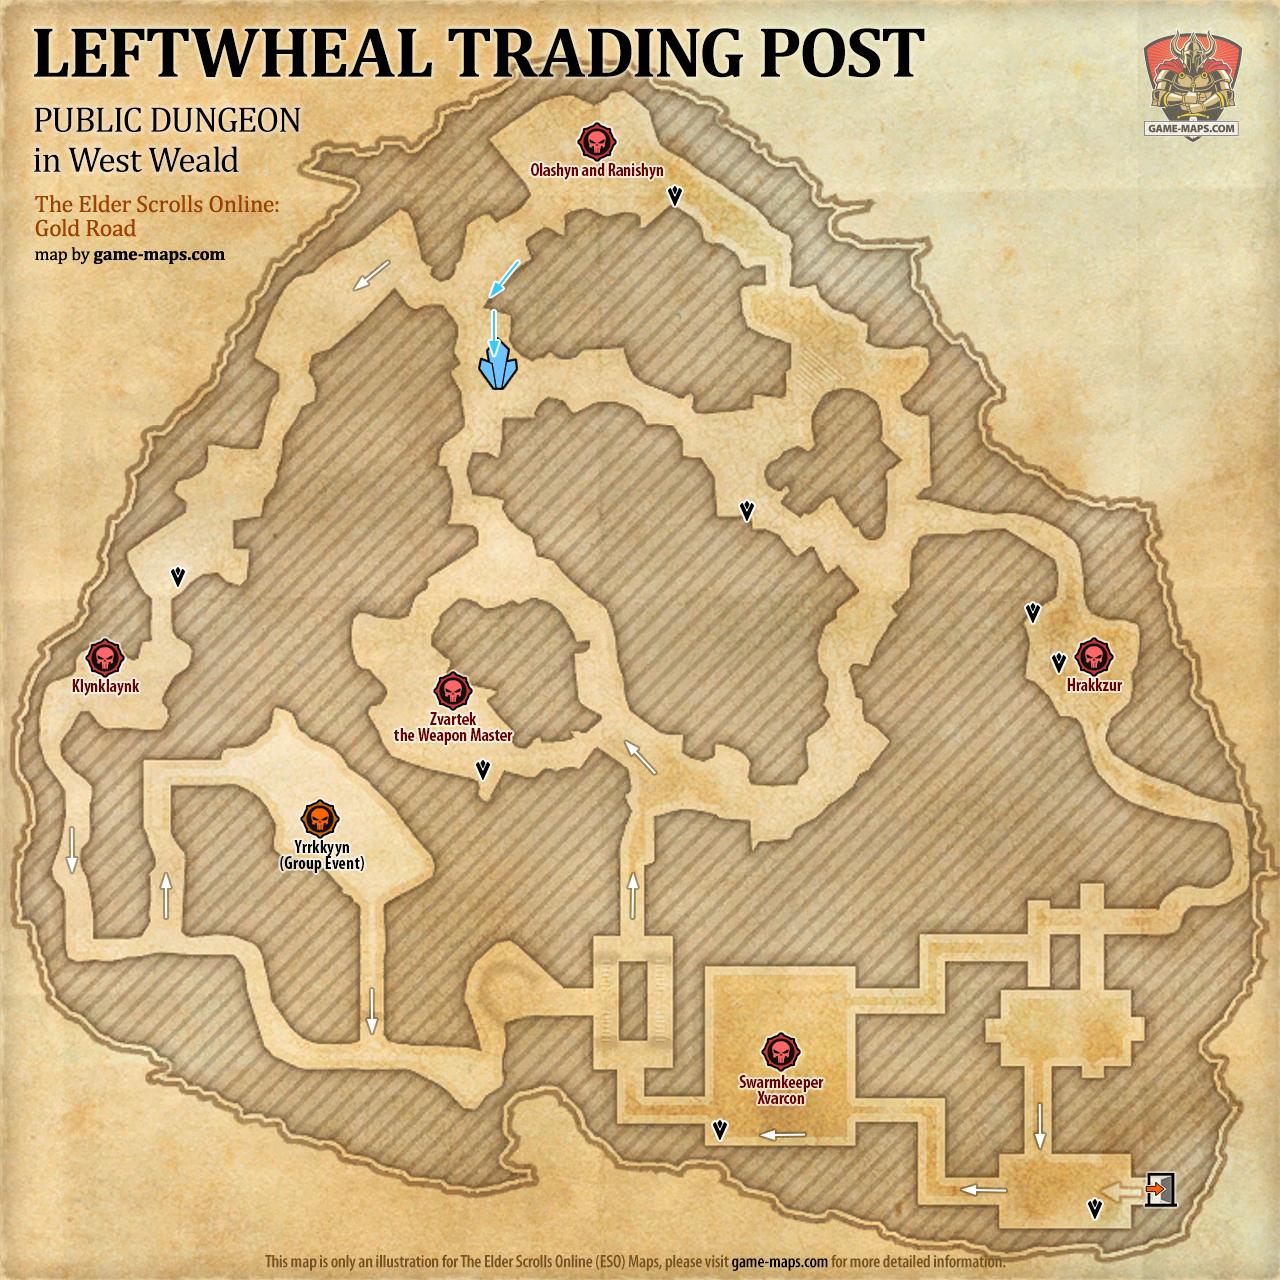 Map of Leftwheal Trading Post Public Dungeon located in West Weald ESO with Skyshard and Bosses.